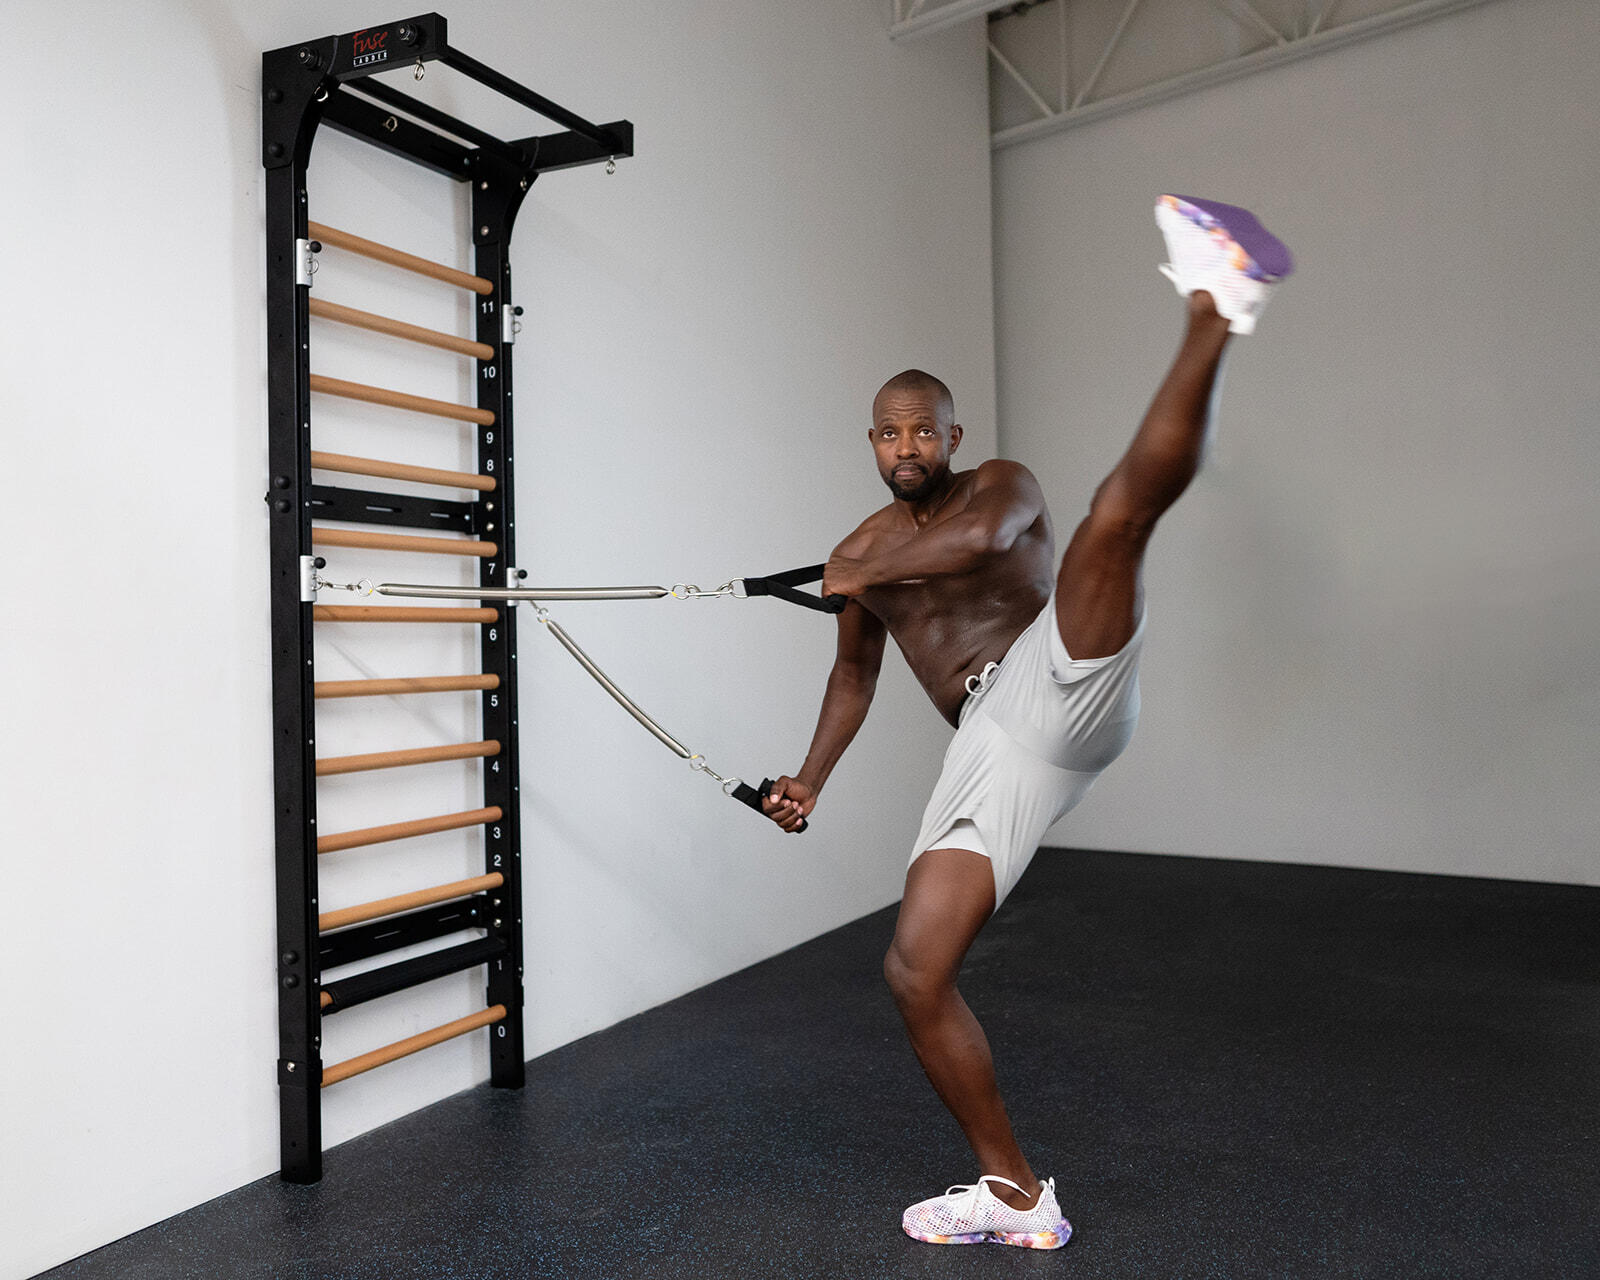 What's So Great About the Fuse Ladder for Pilates Tower Exercises for